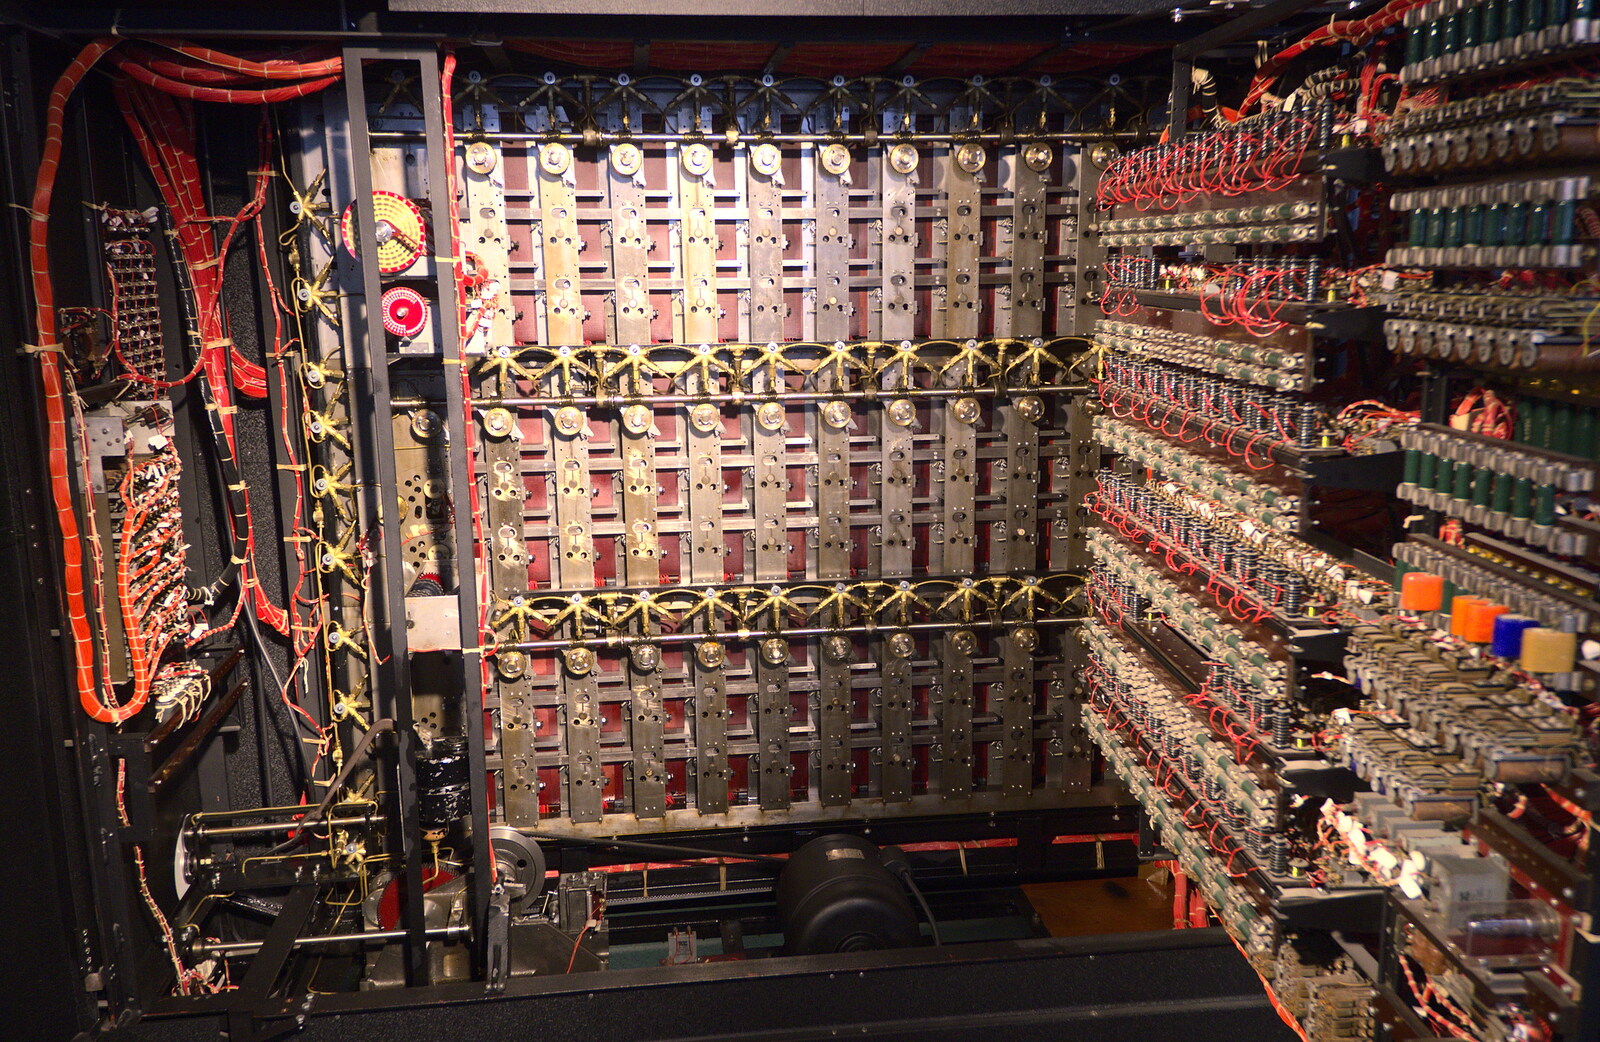 Inside the electro-mechanical Bombe  from TouchType does Bletchley Park, Bletchley, Bedfordshire - 20th July 2012